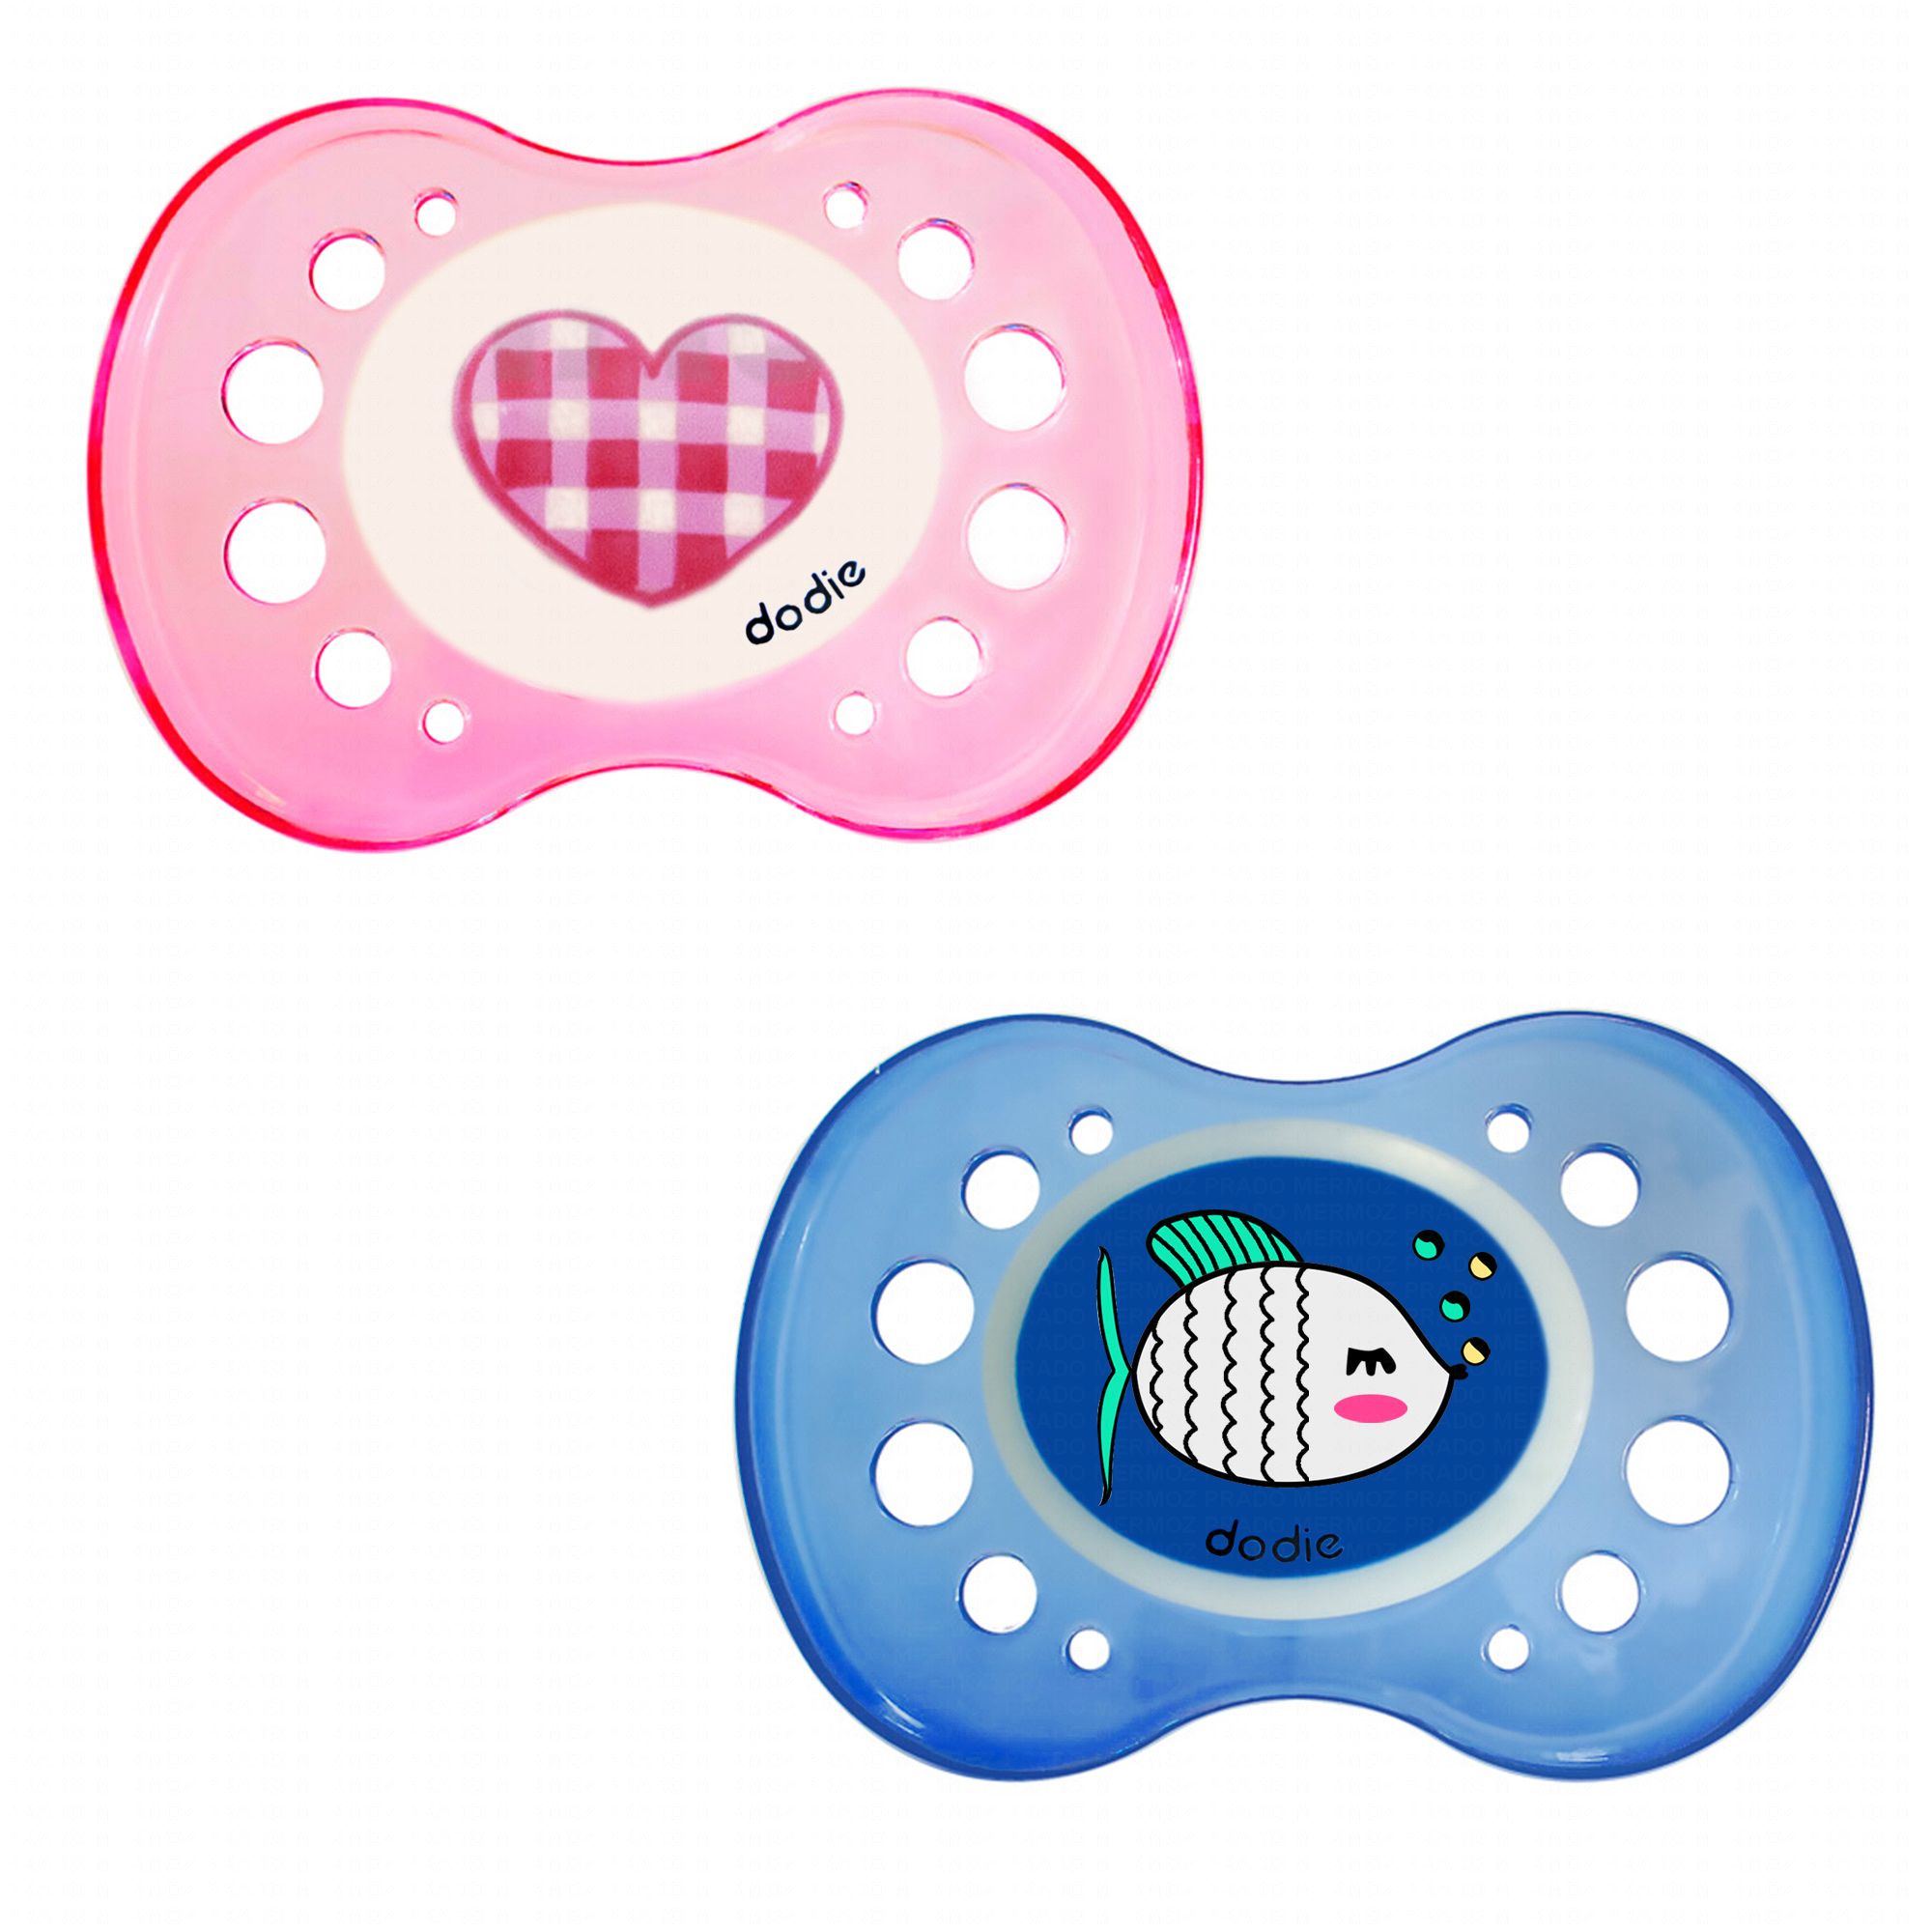 MAM Sucette Perfect Nuit Silicone 18M+